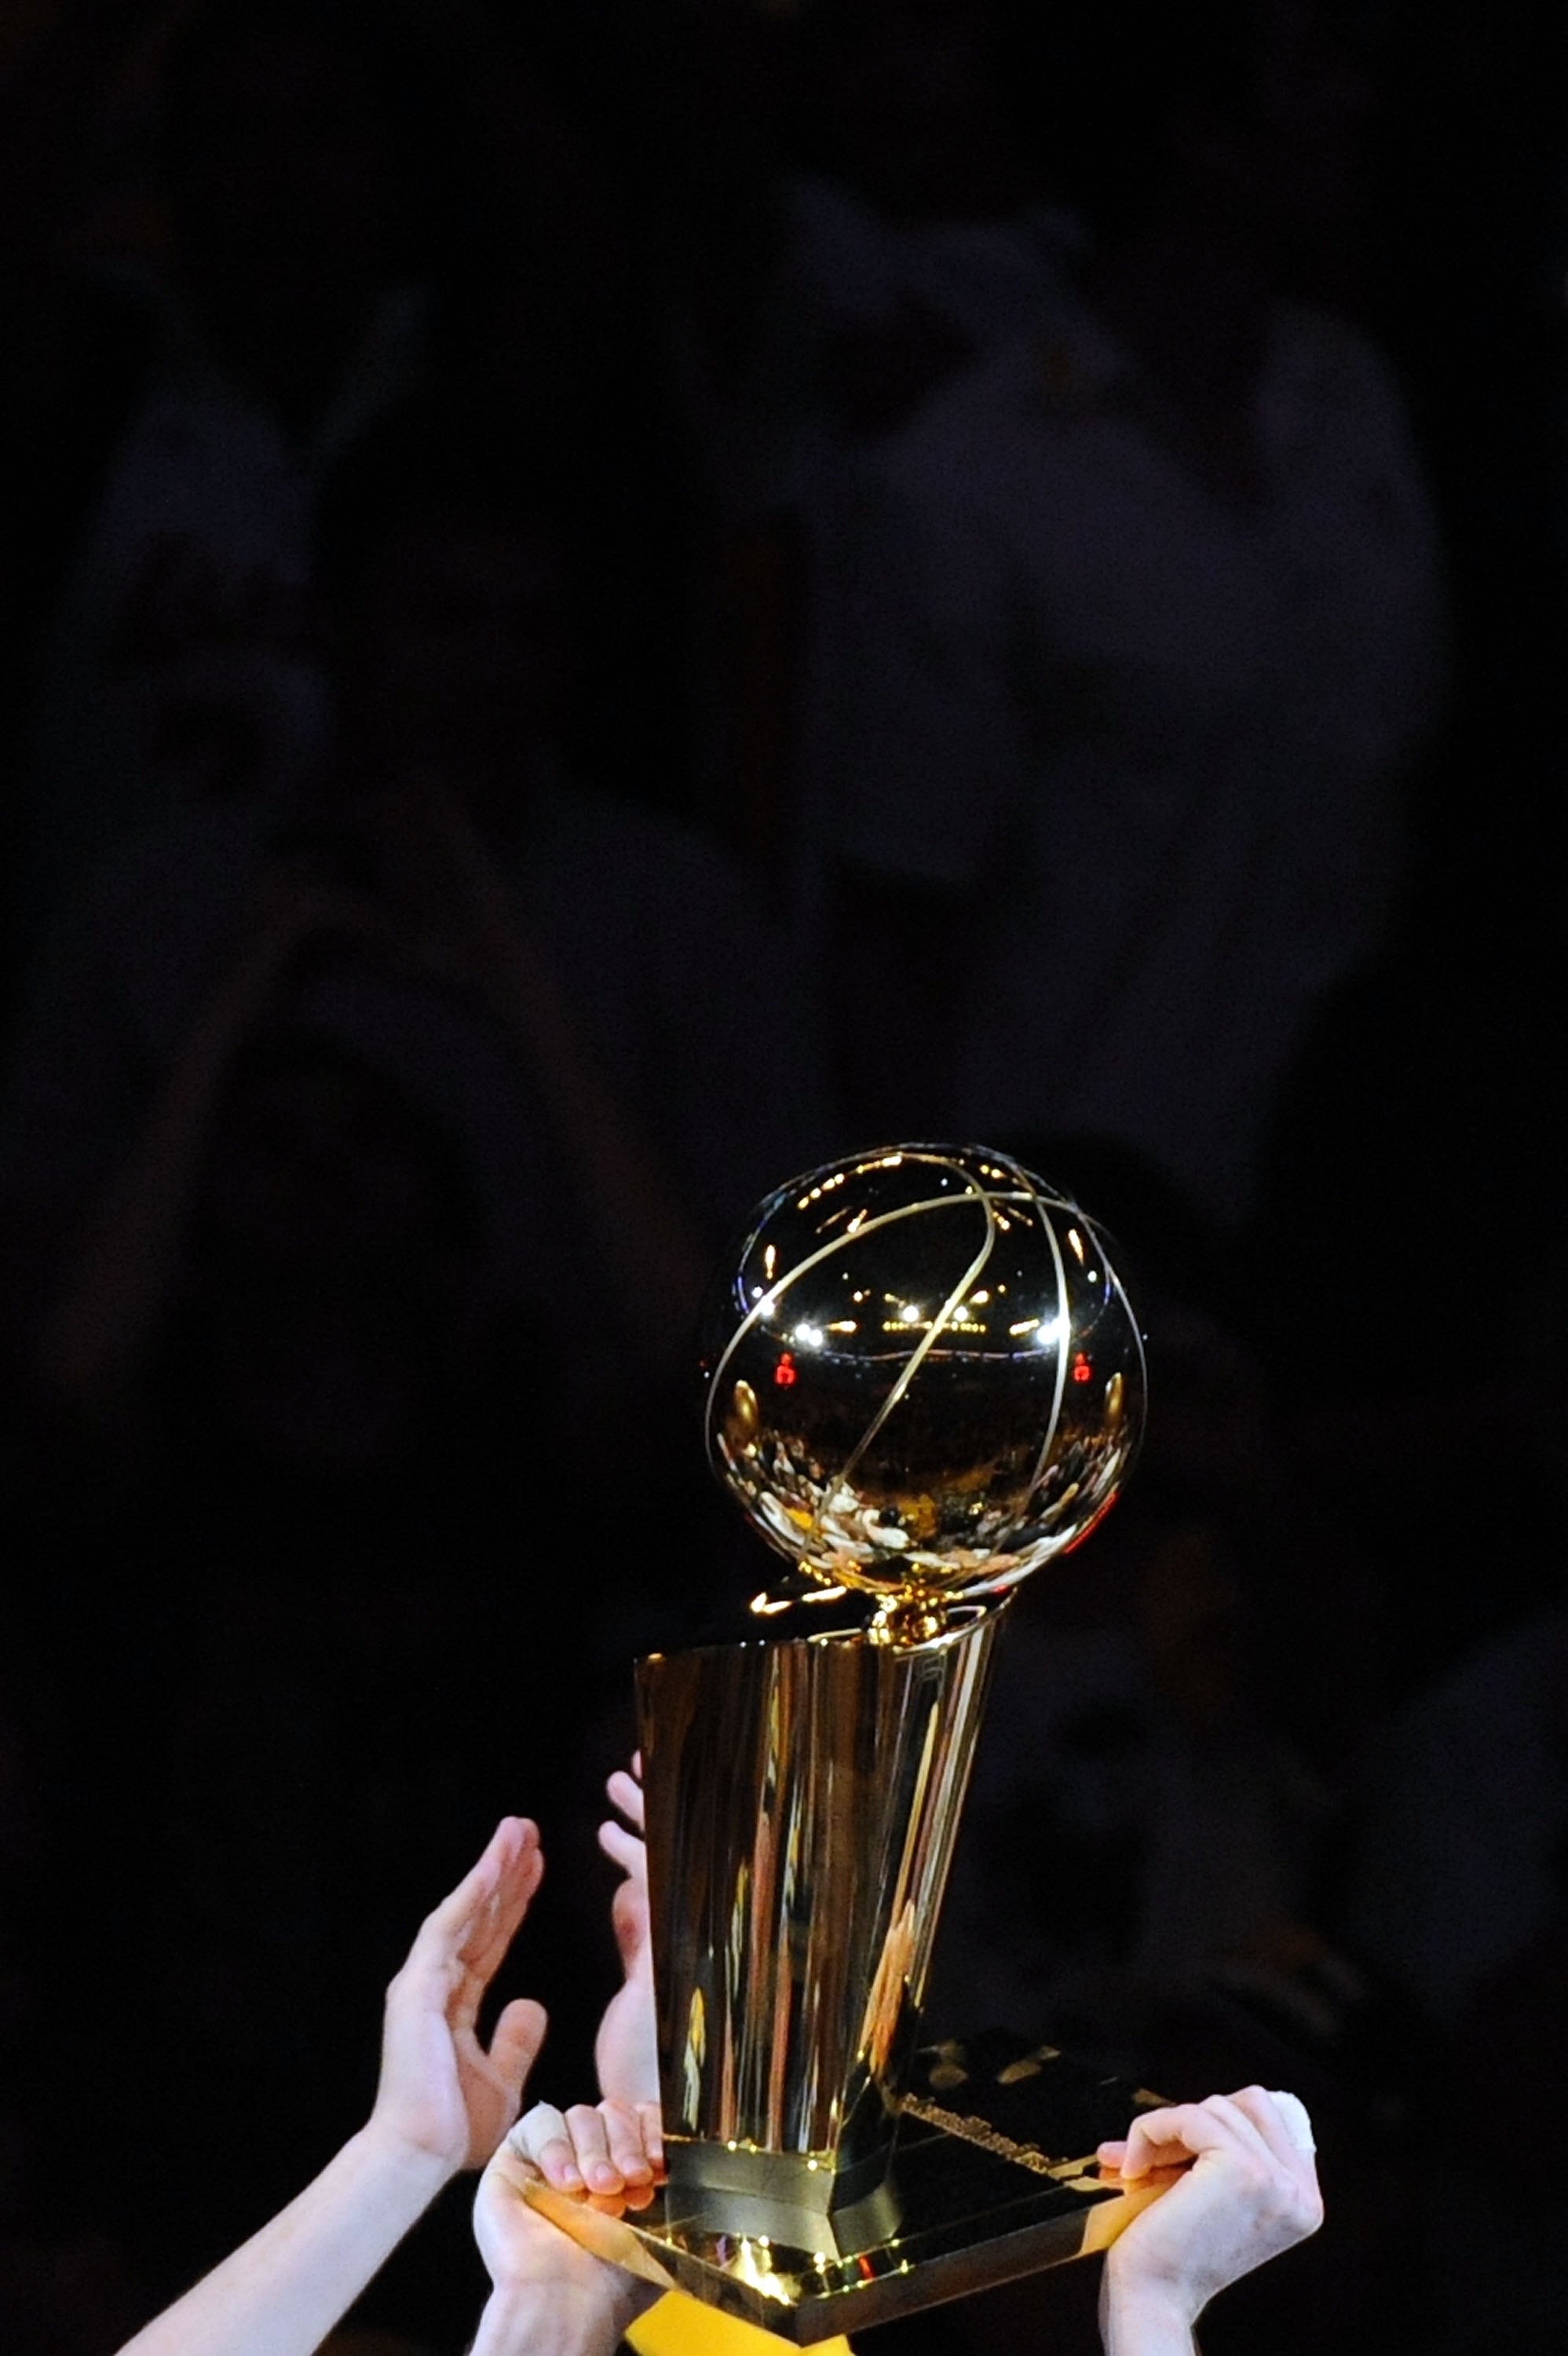 LOS ANGELES, CA - JUNE 17:  The Los Angeles Lakers hold up the Larry O'Brien Trophy after the Lakers defeated the Boston Celtics in Game Seven of the 2010 NBA Finals at Staples Center on June 17, 2010 in Los Angeles, California.  NOTE TO USER: User expres